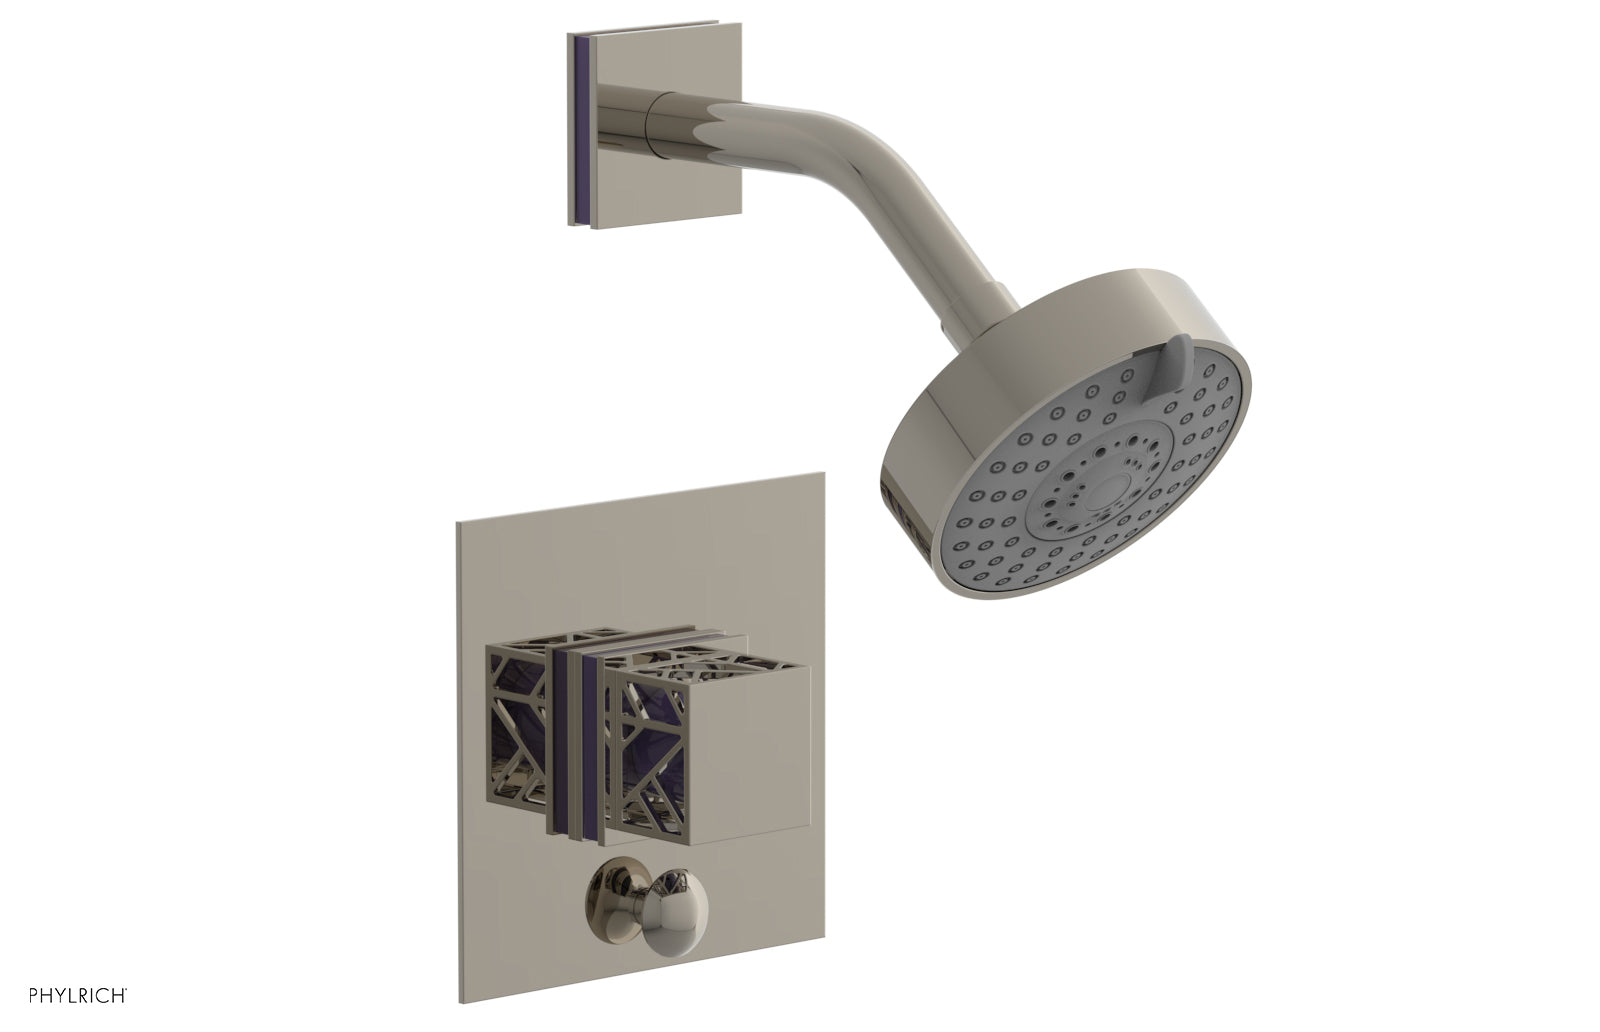 Phylrich JOLIE Pressure Balance Shower and Diverter Set (Less Spout), Square Handle with "Pink" Accents